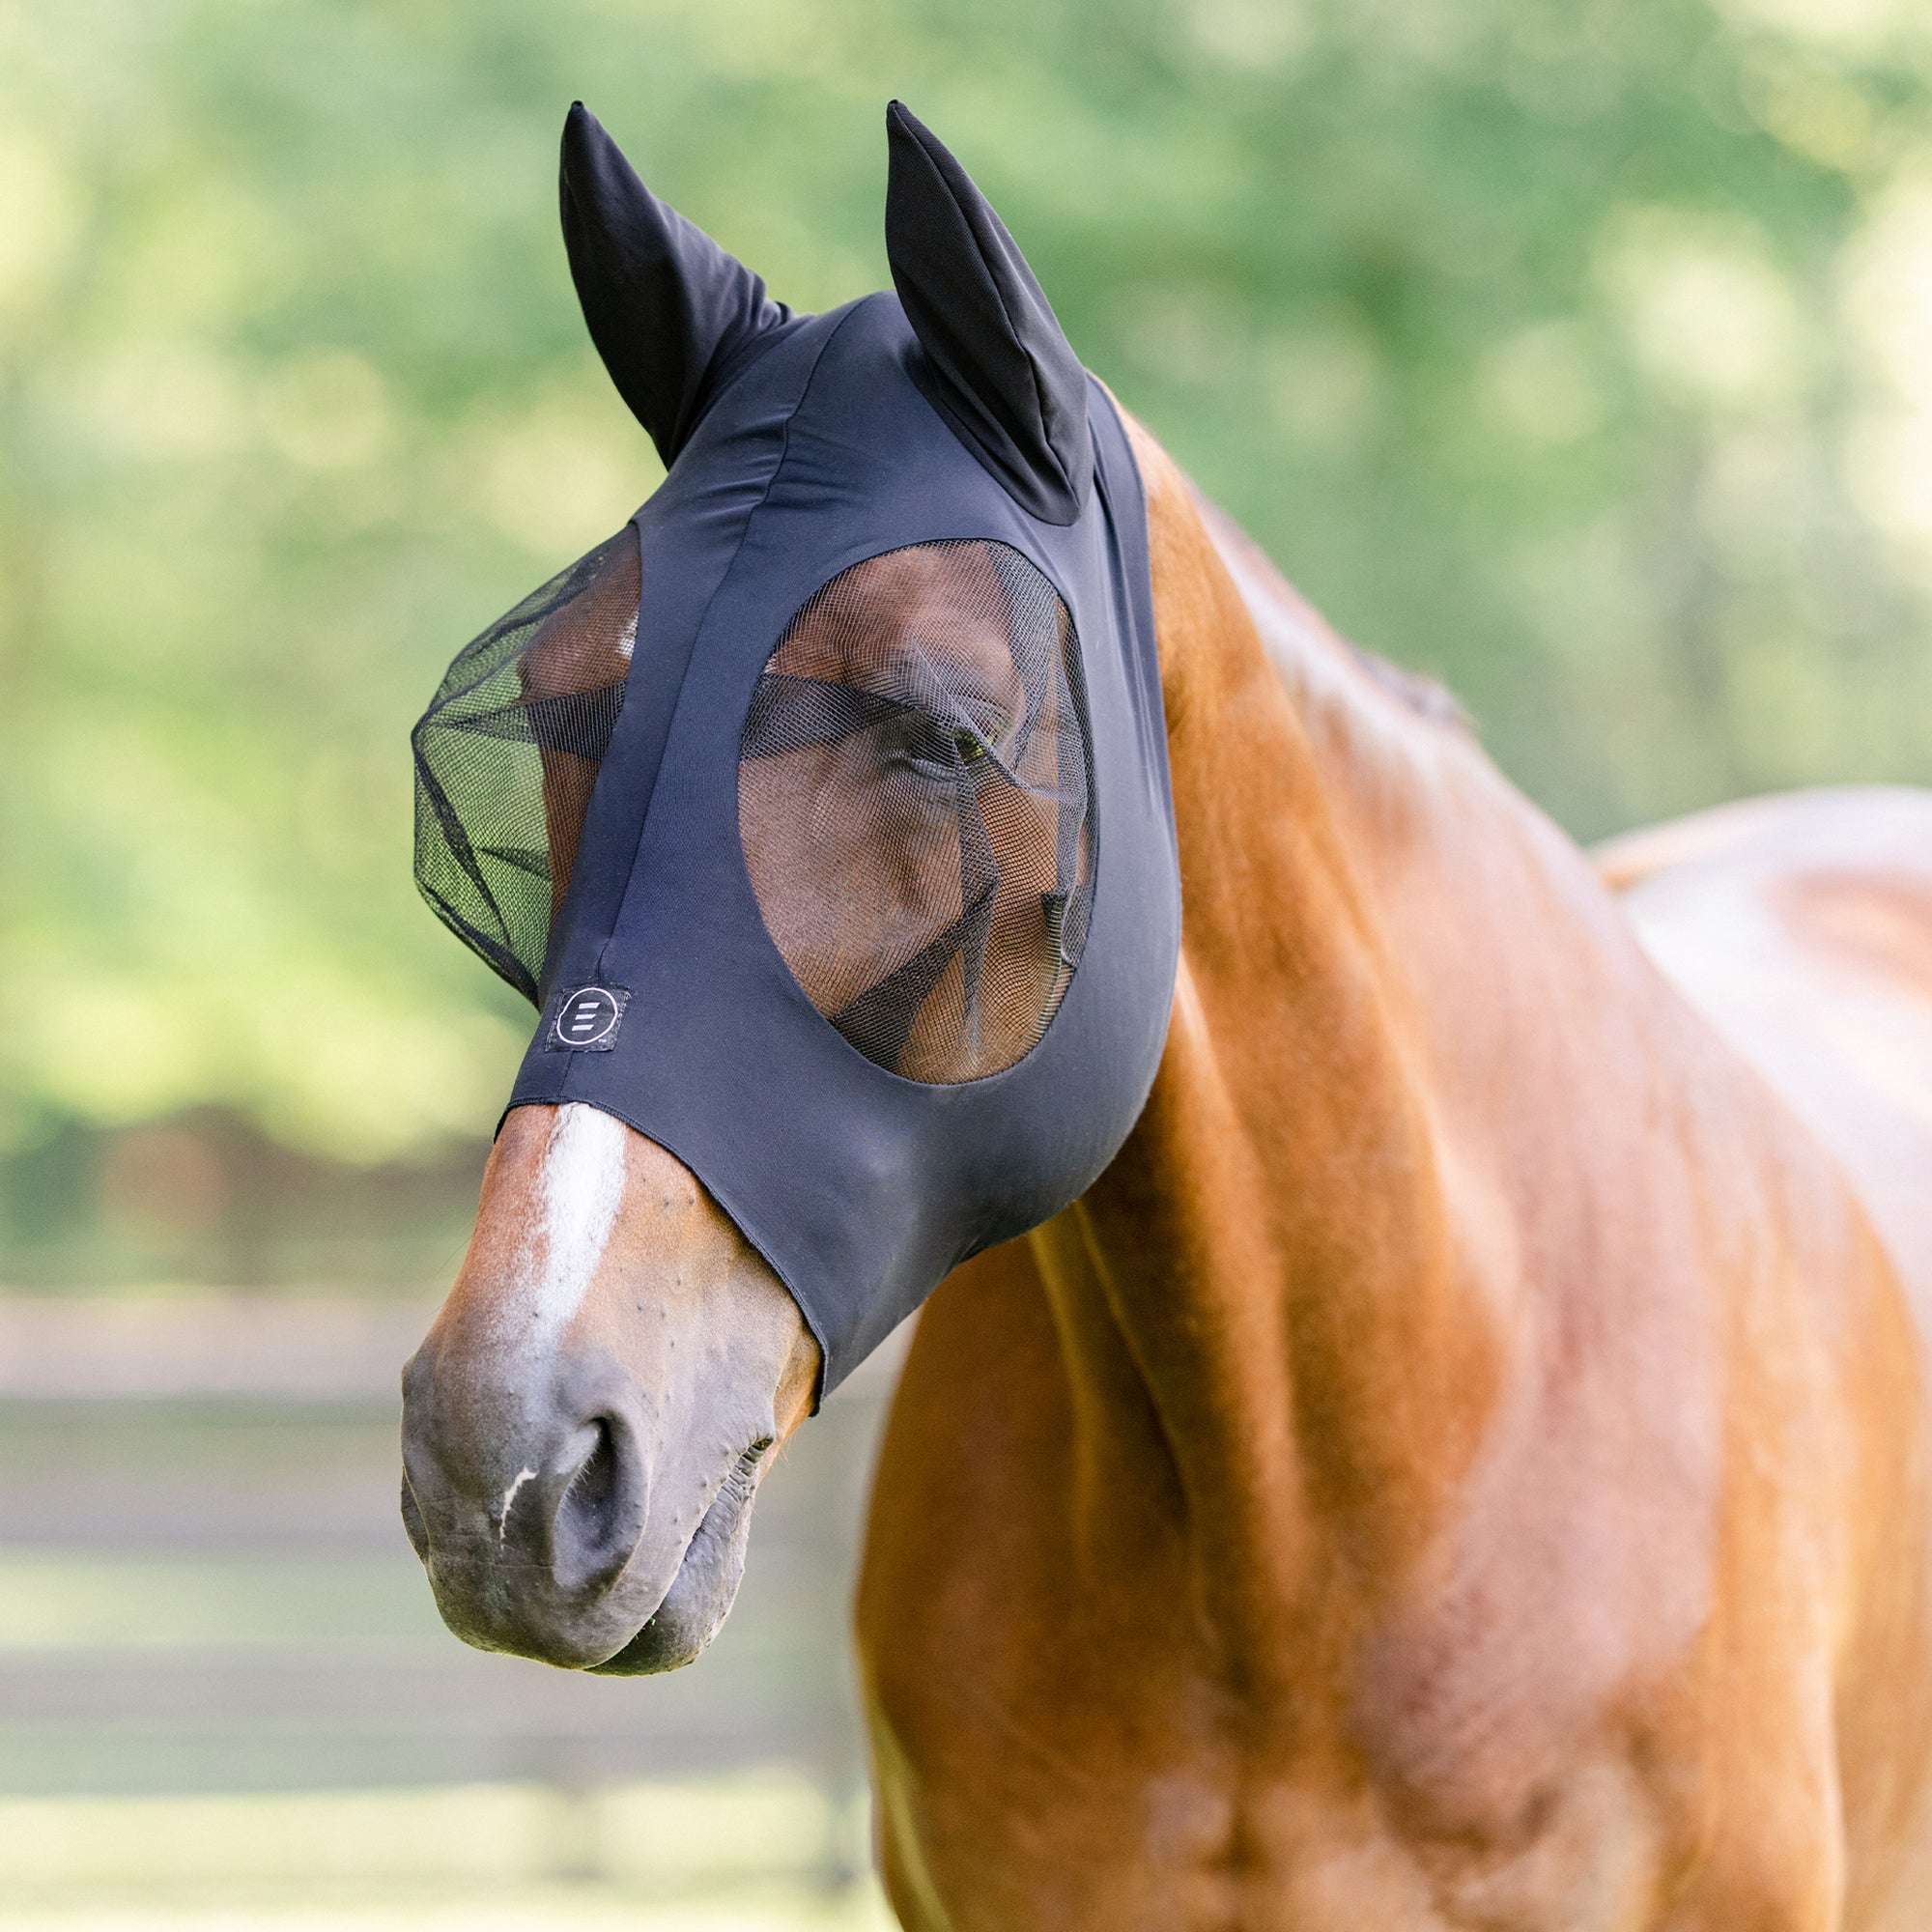 The Essential FlyMask protects with moisture wicking, anti-microbial lycra guards against irritation and bacterial growth